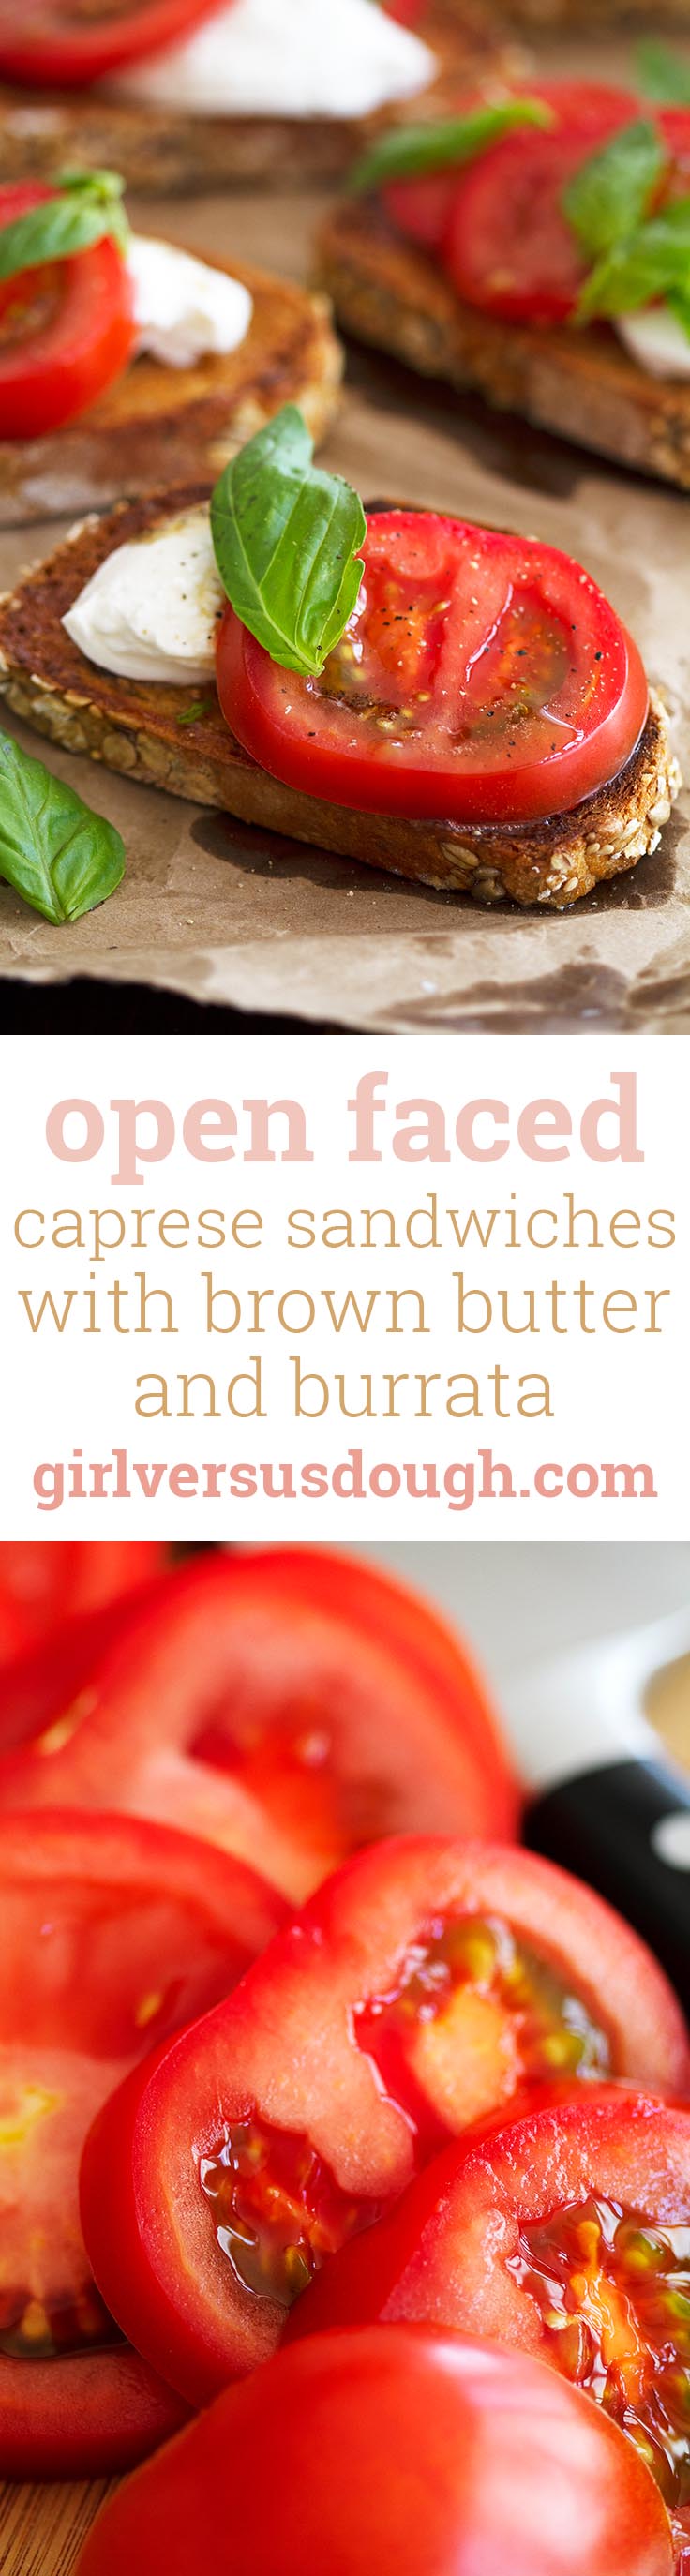 Open Faced Caprese Sandwiches with Brown Butter and Burrata -- an easy and delicious appetizer or light meal, perfect for entertaining! www.girlversusdough.com @girlversusdough